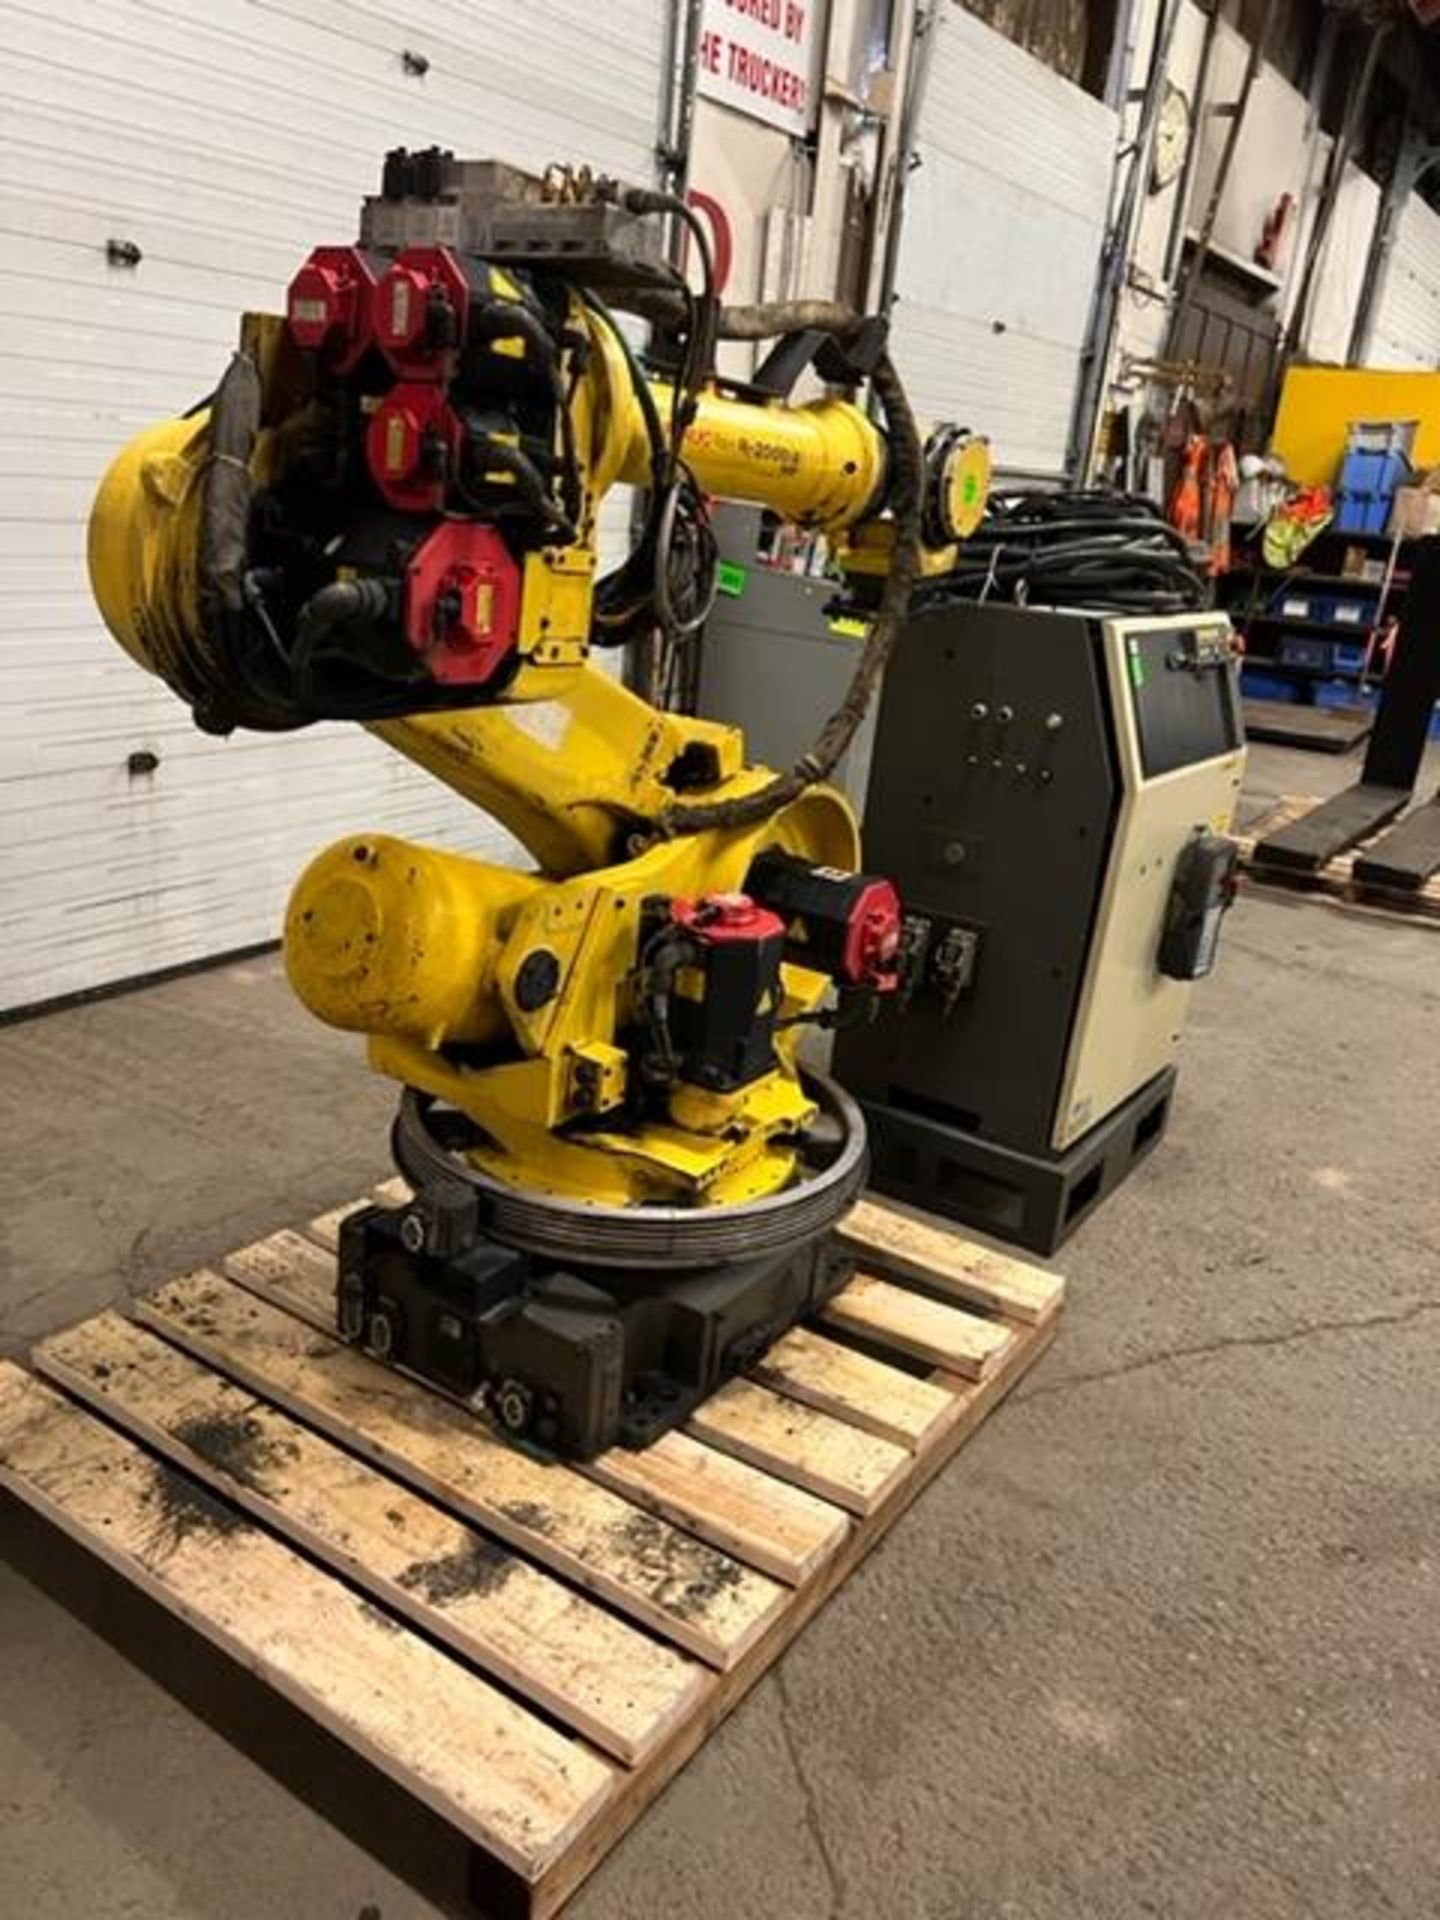 MINT Fanuc Handling Robot Model R-2000iA 165F - 165kg payload with R-J3iB Controller and pendant - Image 5 of 5